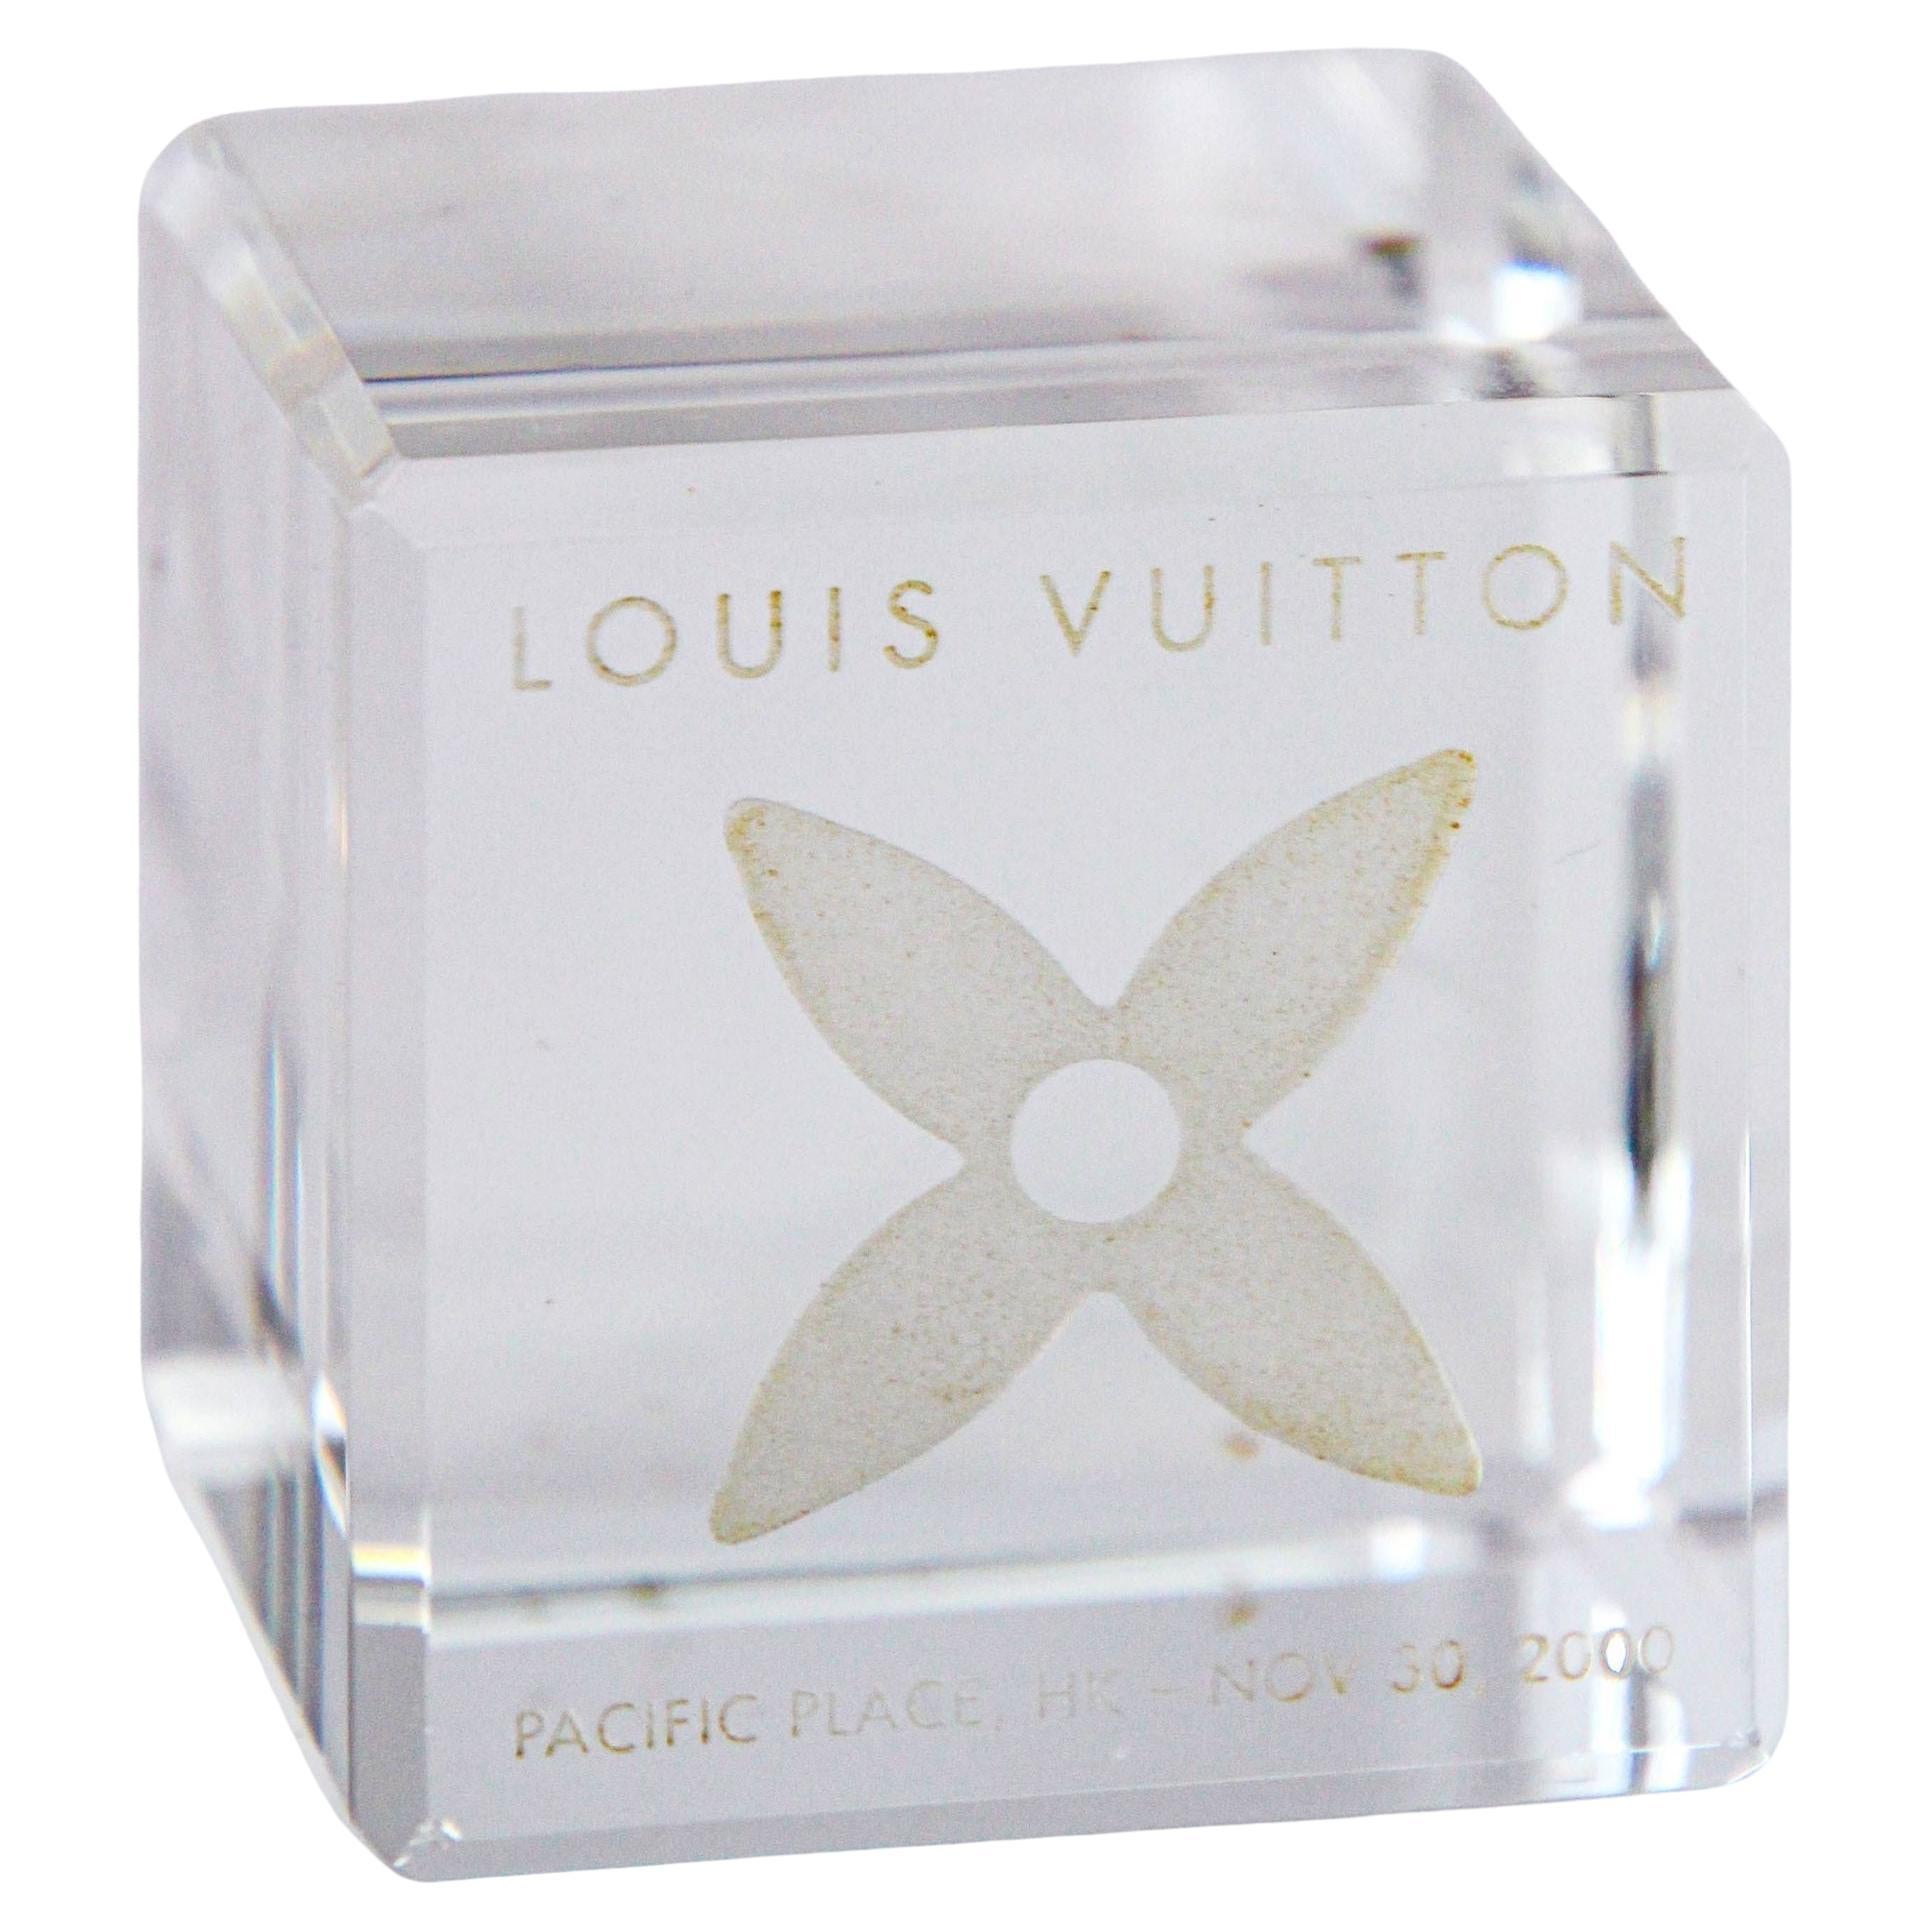 LOUIS VUITTON Cube Paperweight LOUIS VUITTON Monogram Crystal Paper Weight For Sale